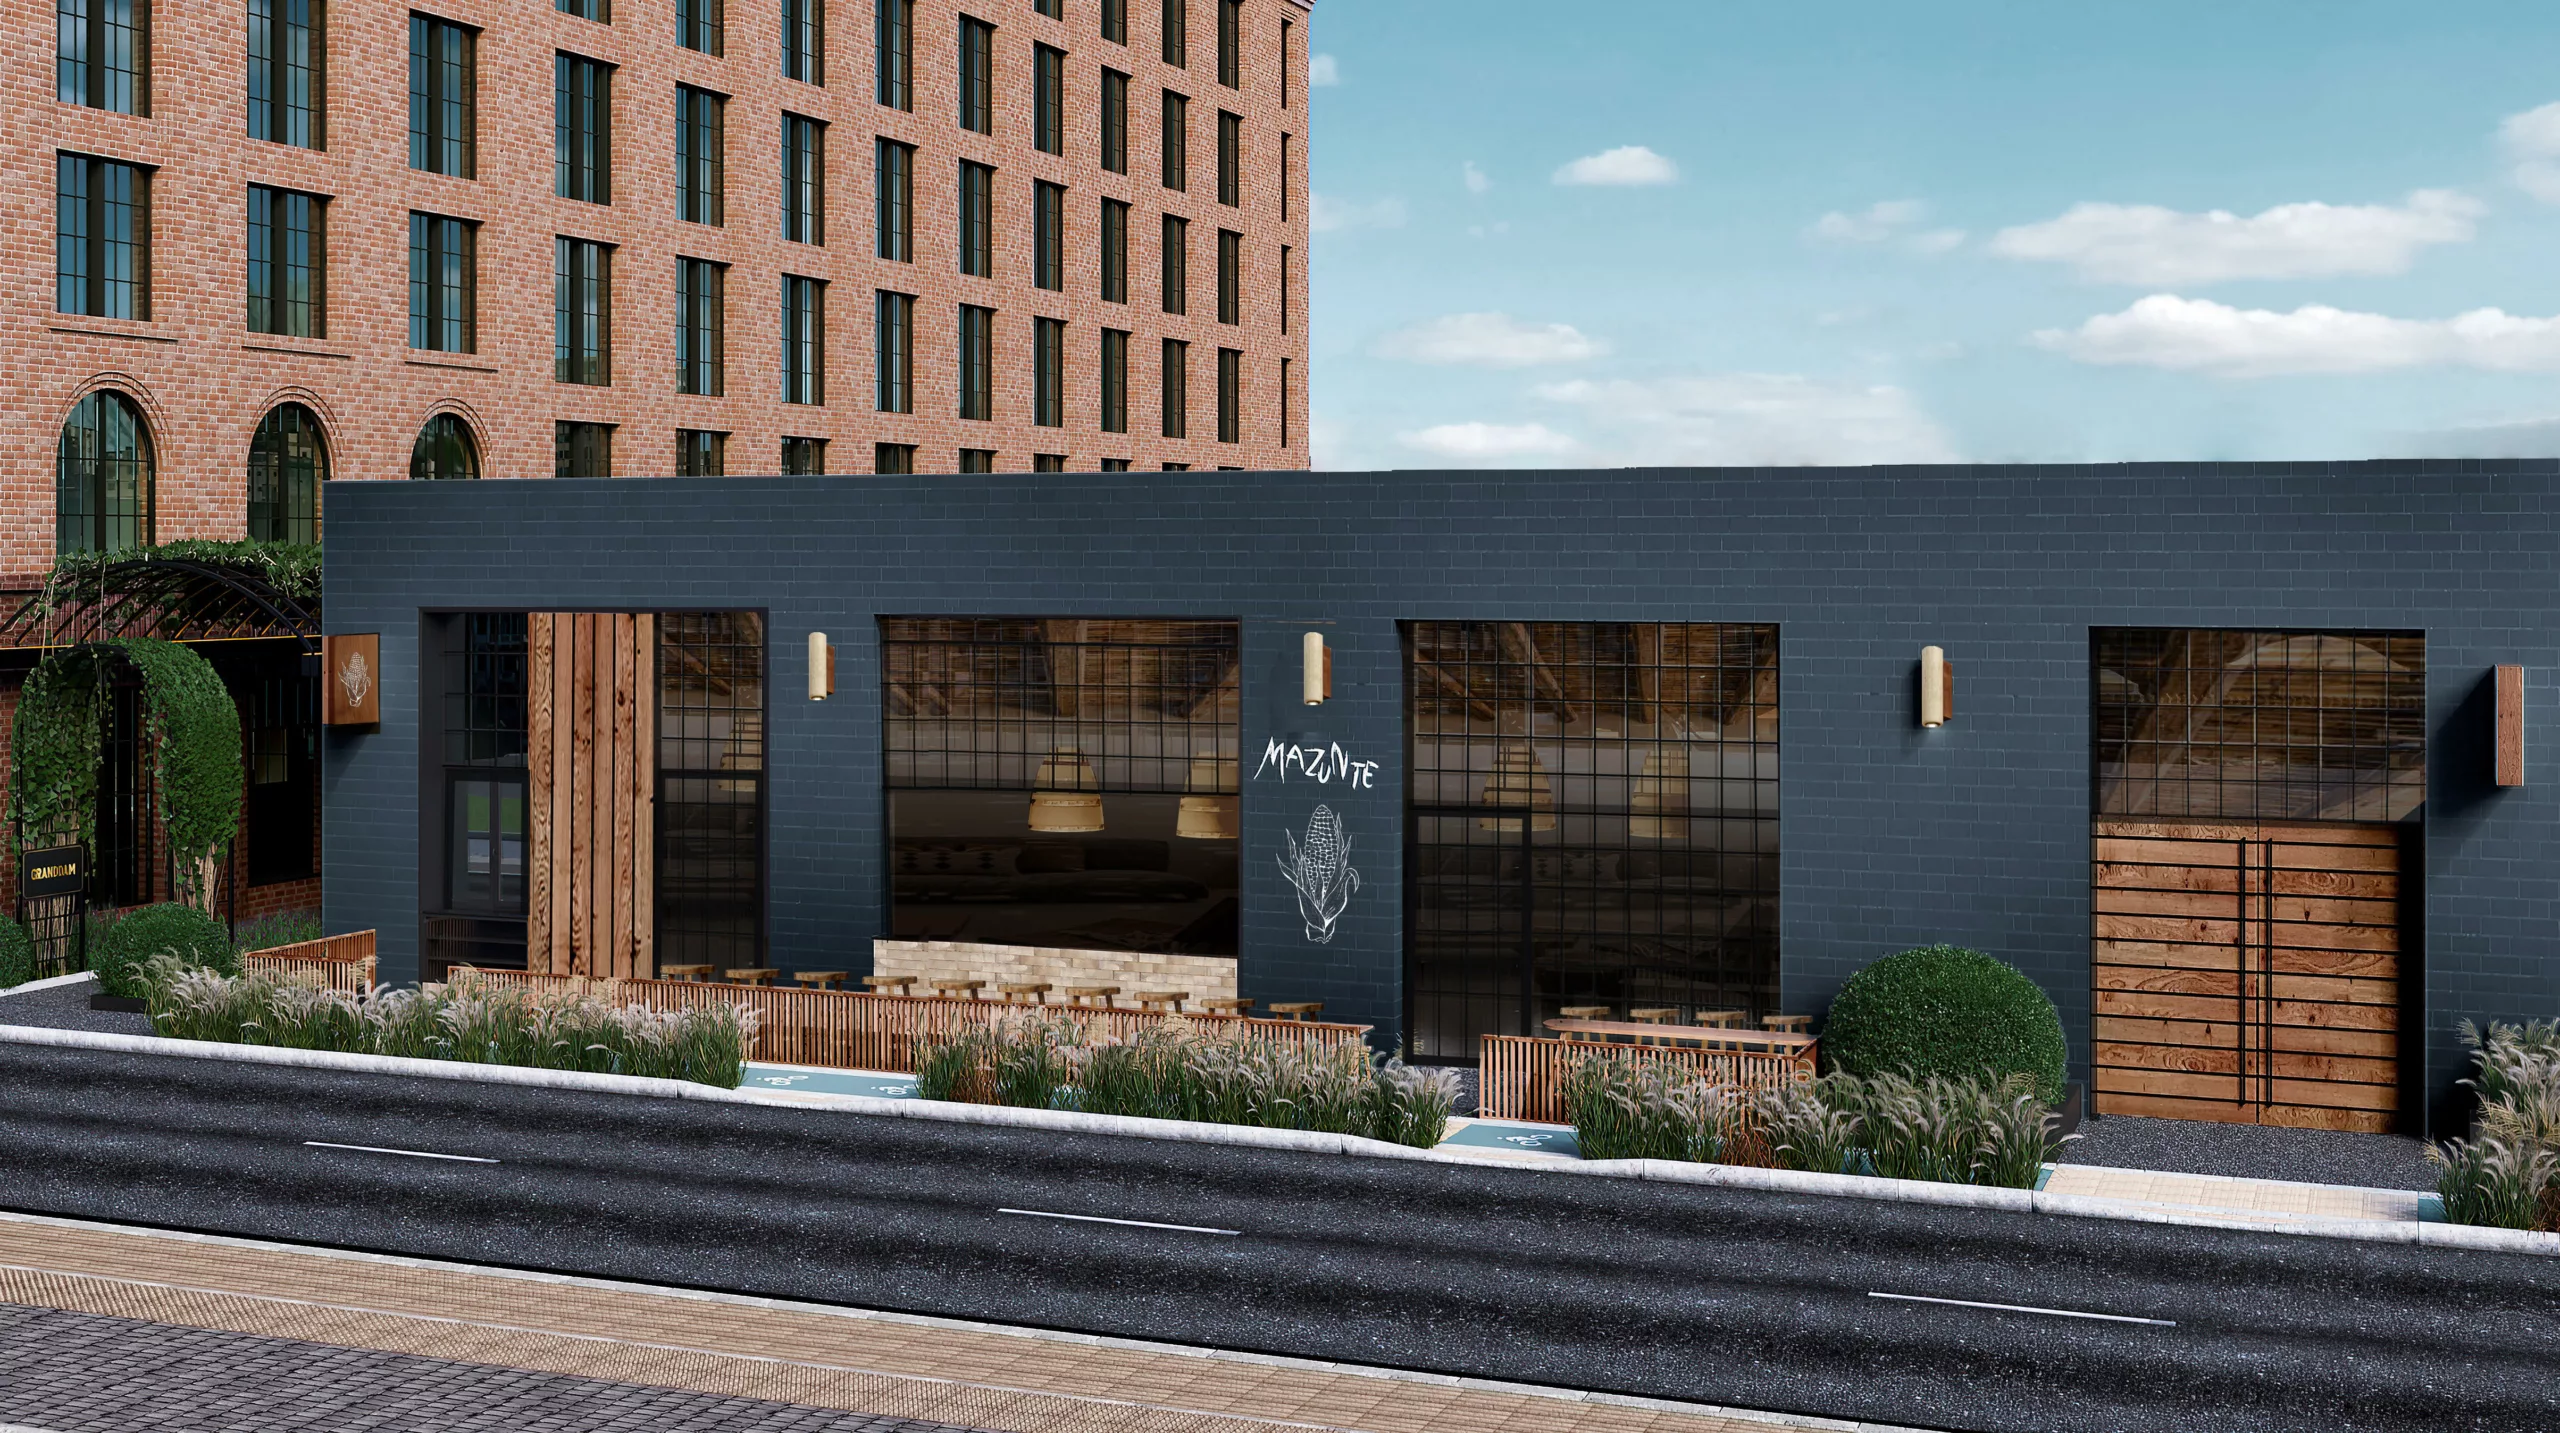 New restaurant and event venue to open next to Manchester Street Hotel in fall 2023